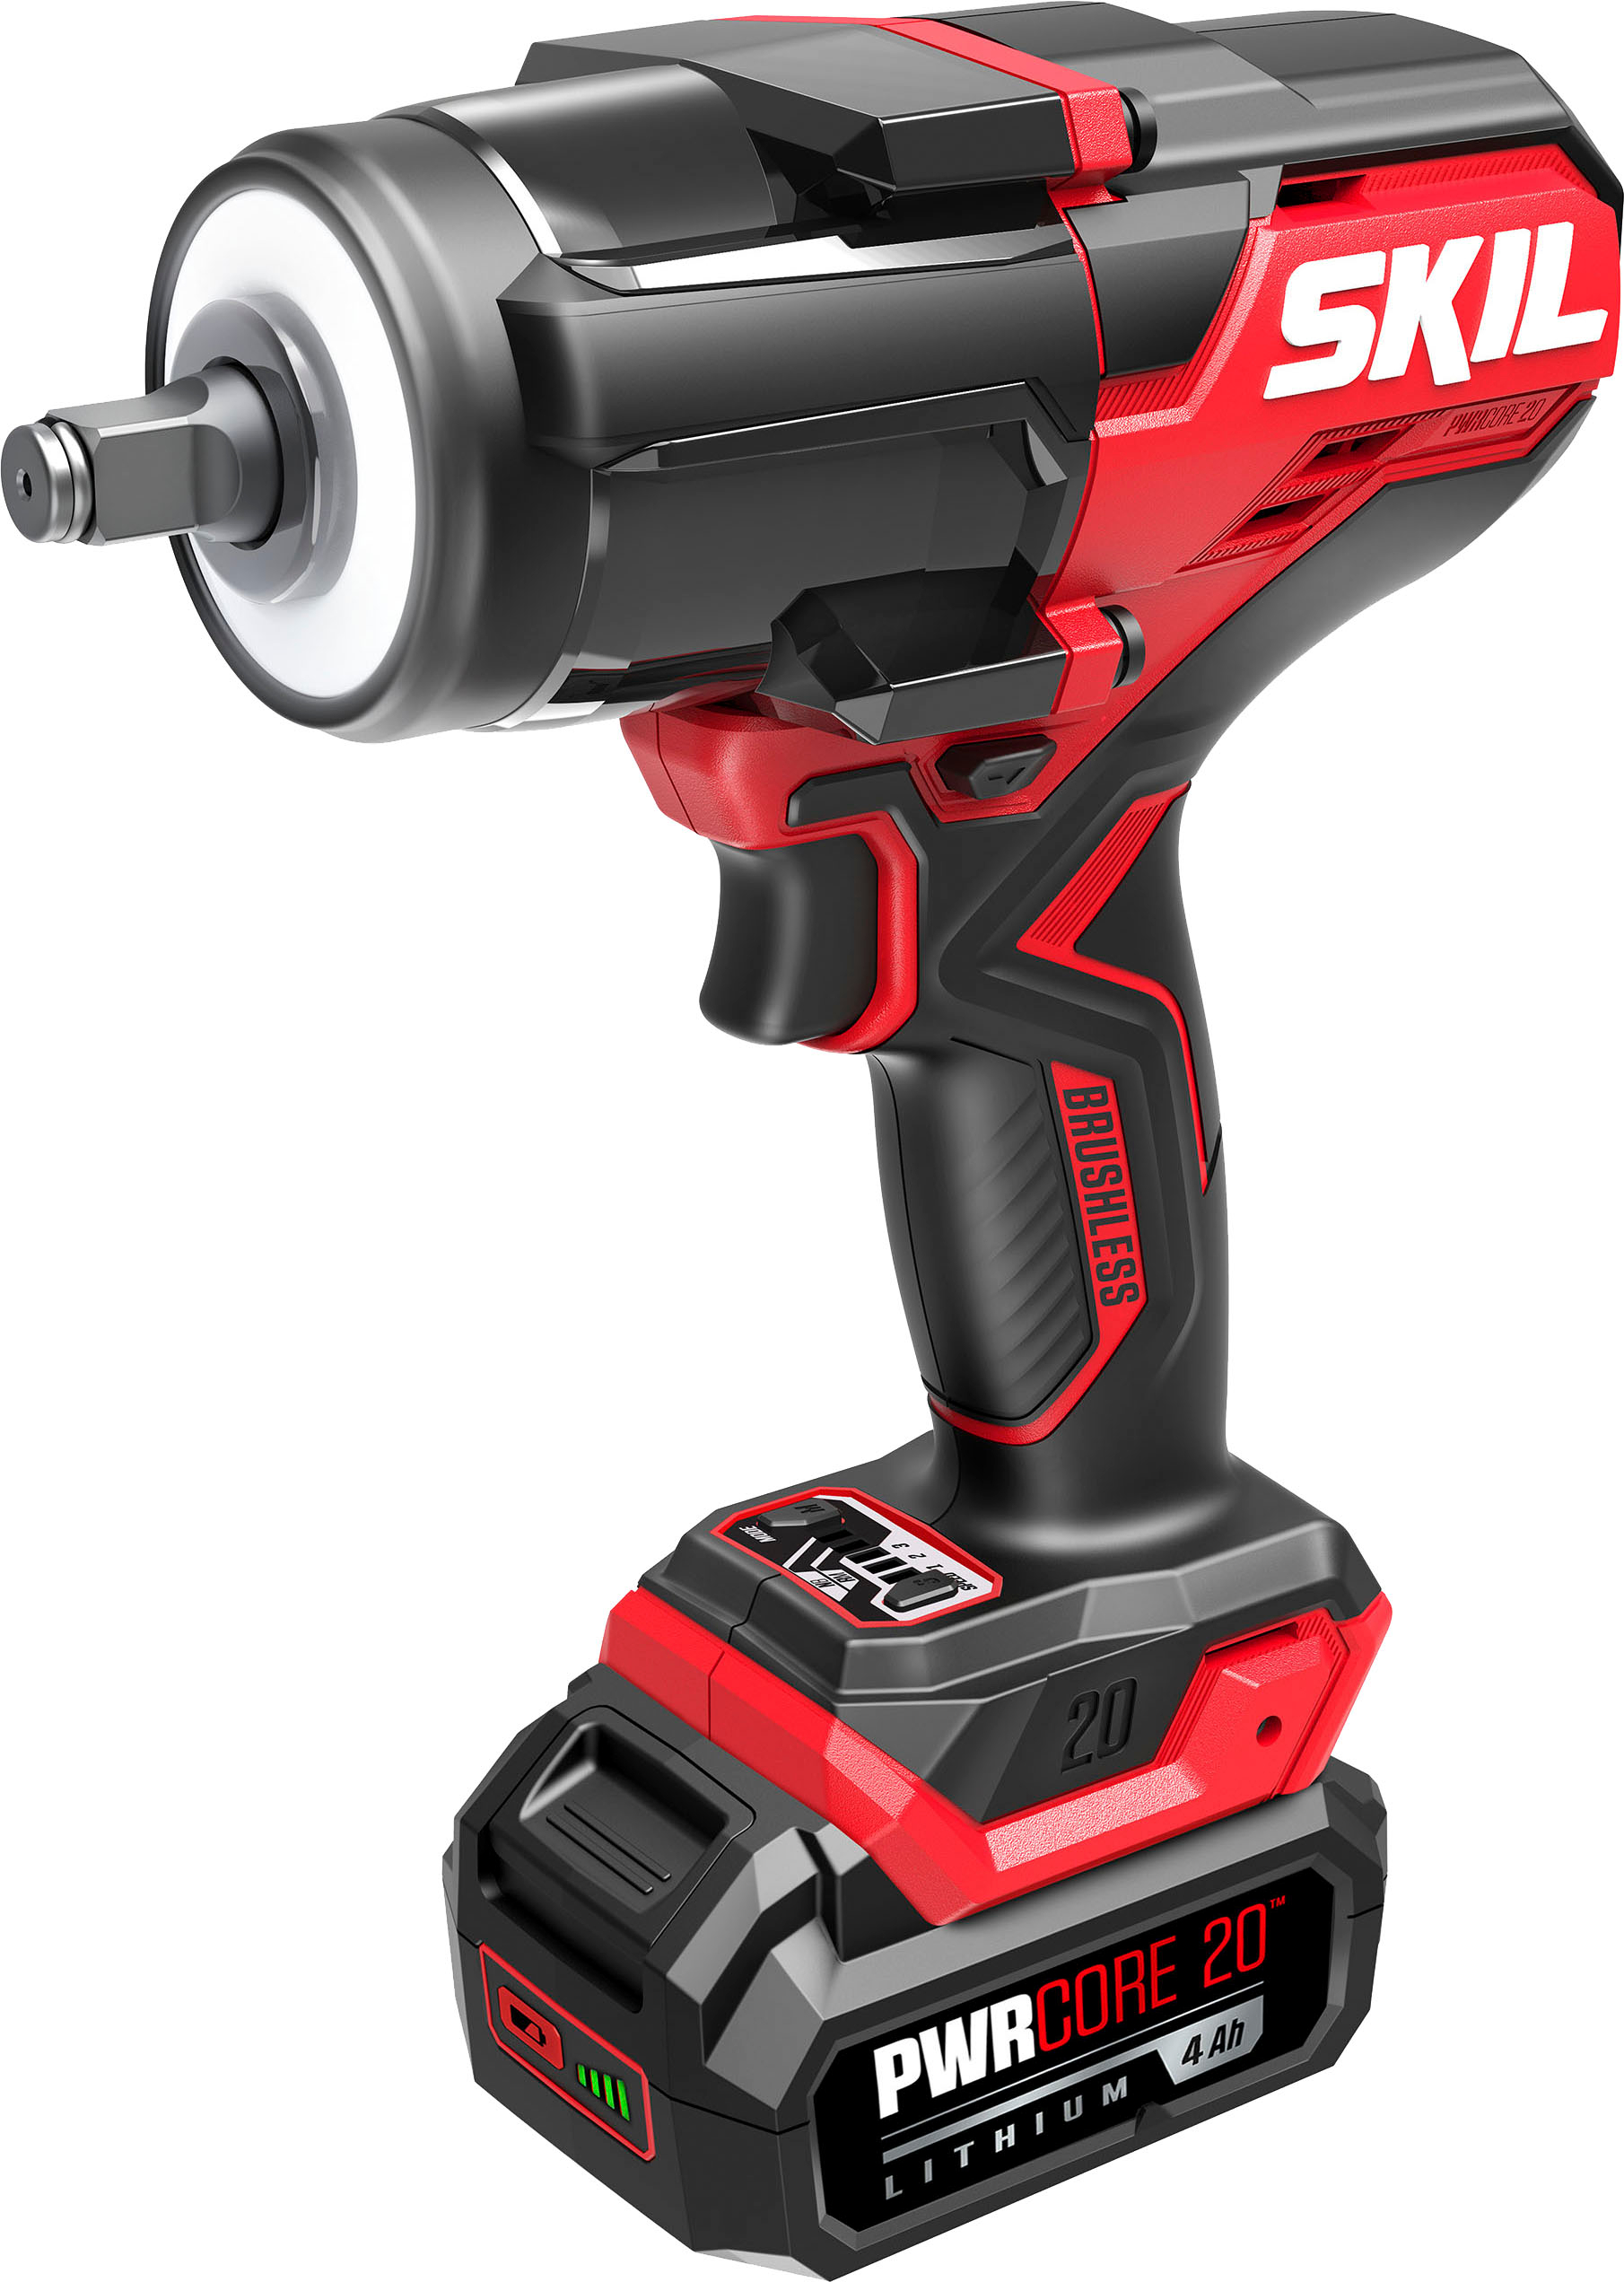 SKIL PWR CORE 20™ Brushless 20V 1/2 In. Mid-Torque Impact Wrench